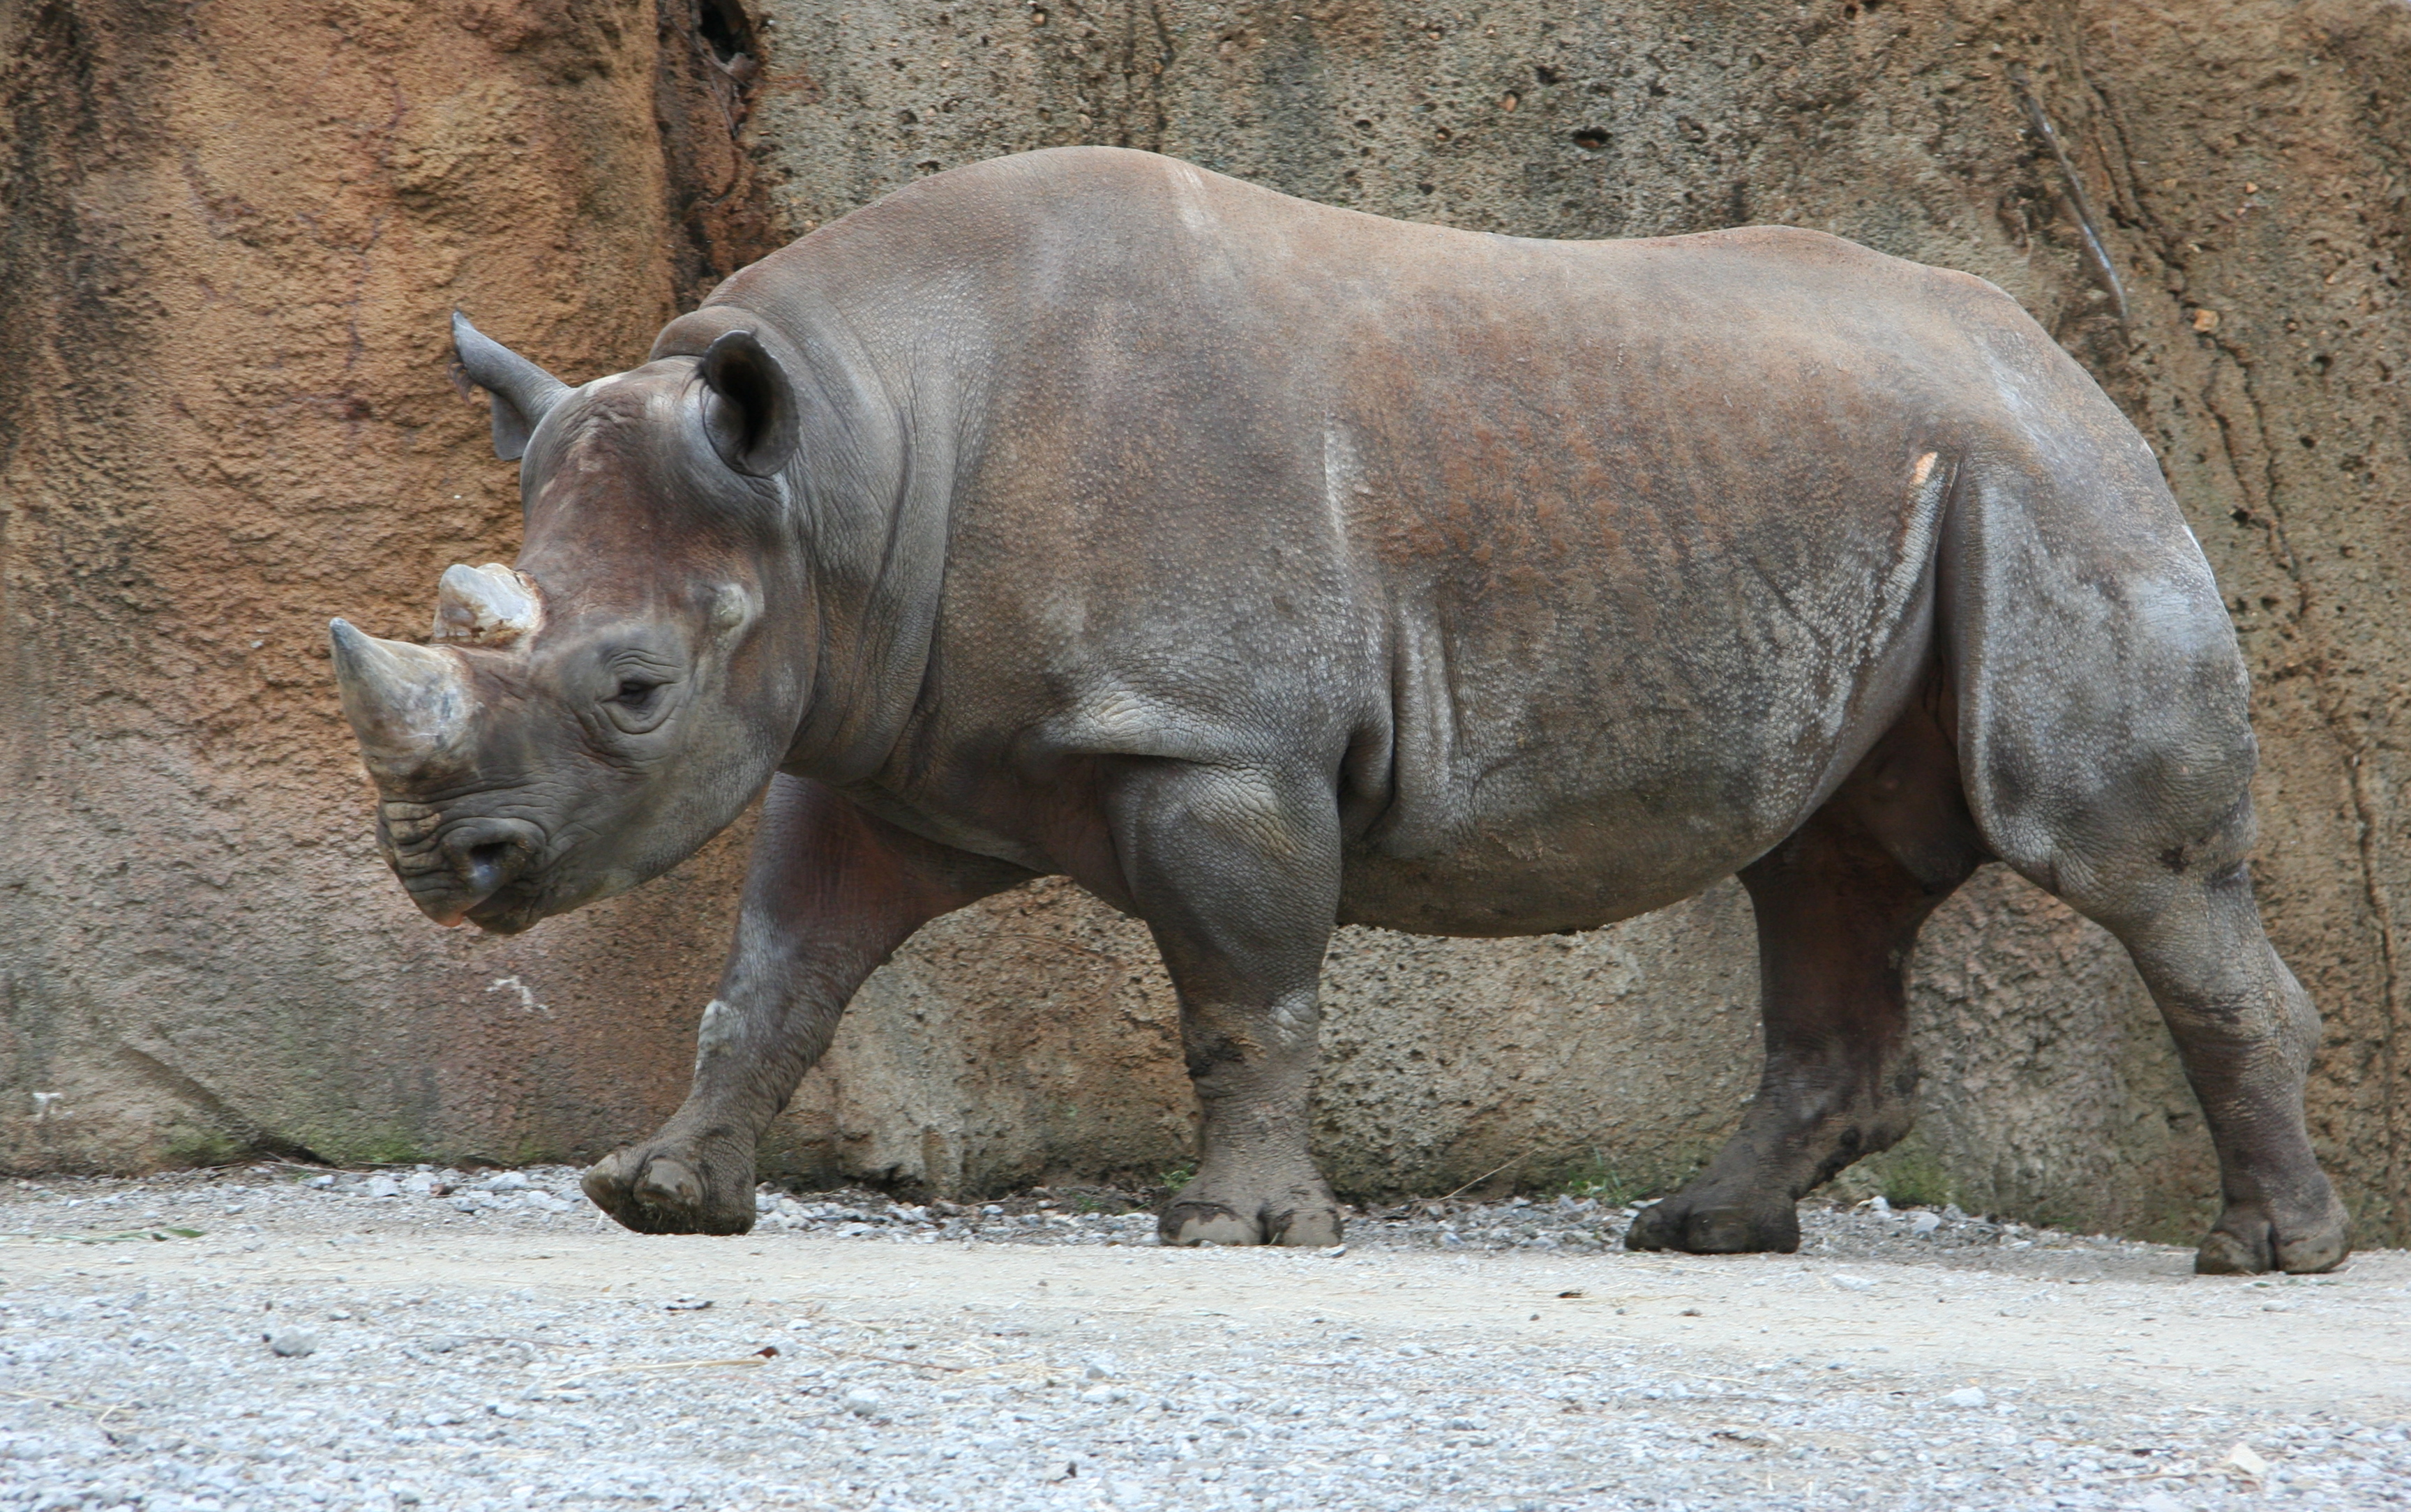 This is a rhino